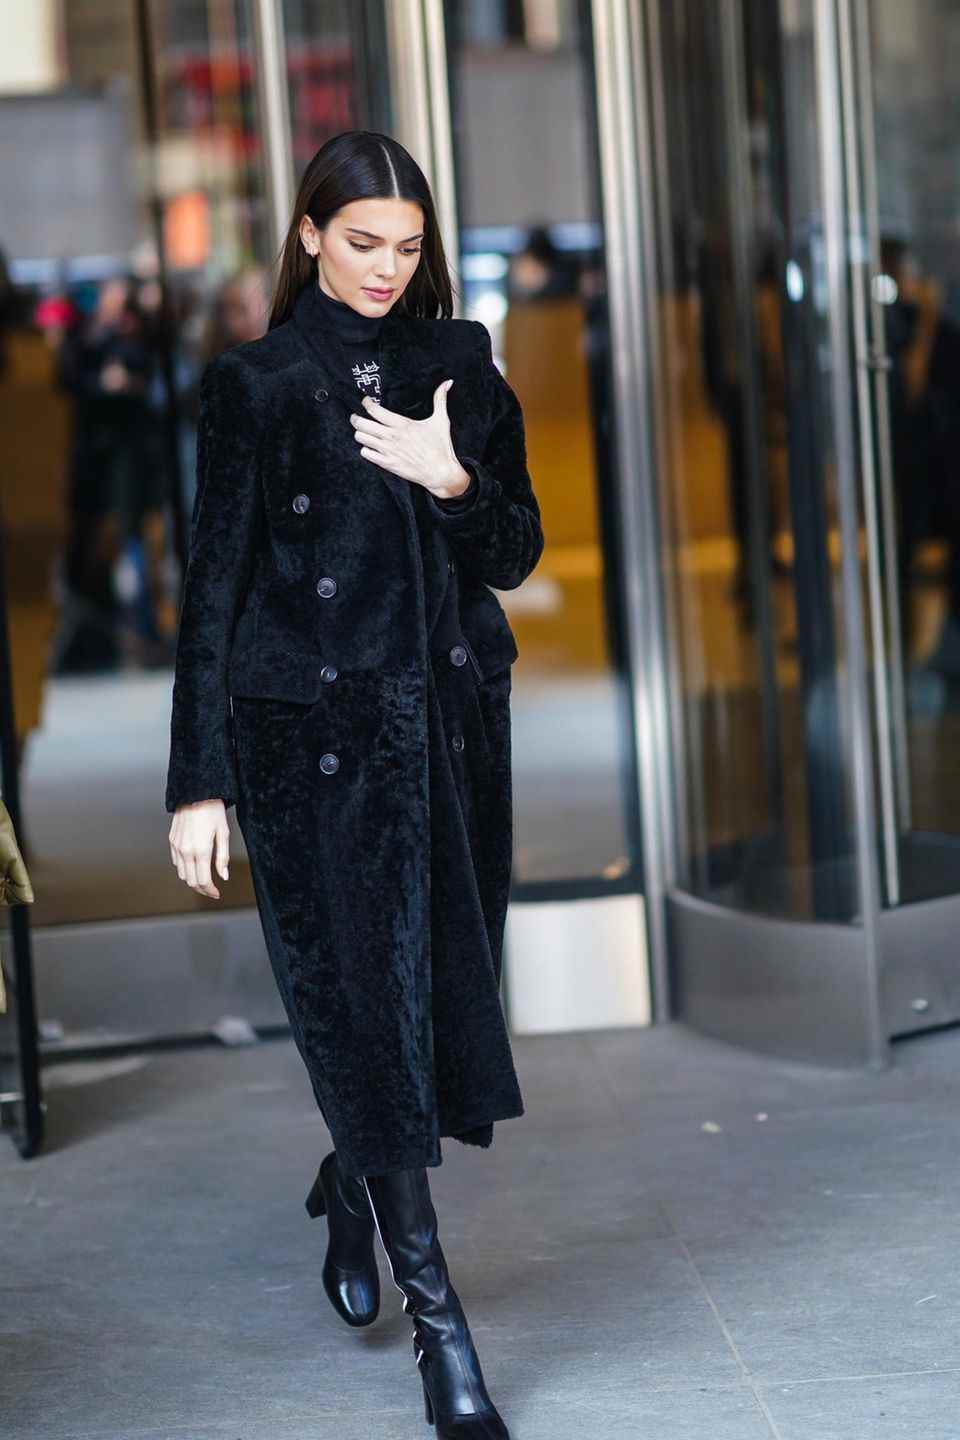 Kendall Jenner on the streets of New York, February 2020